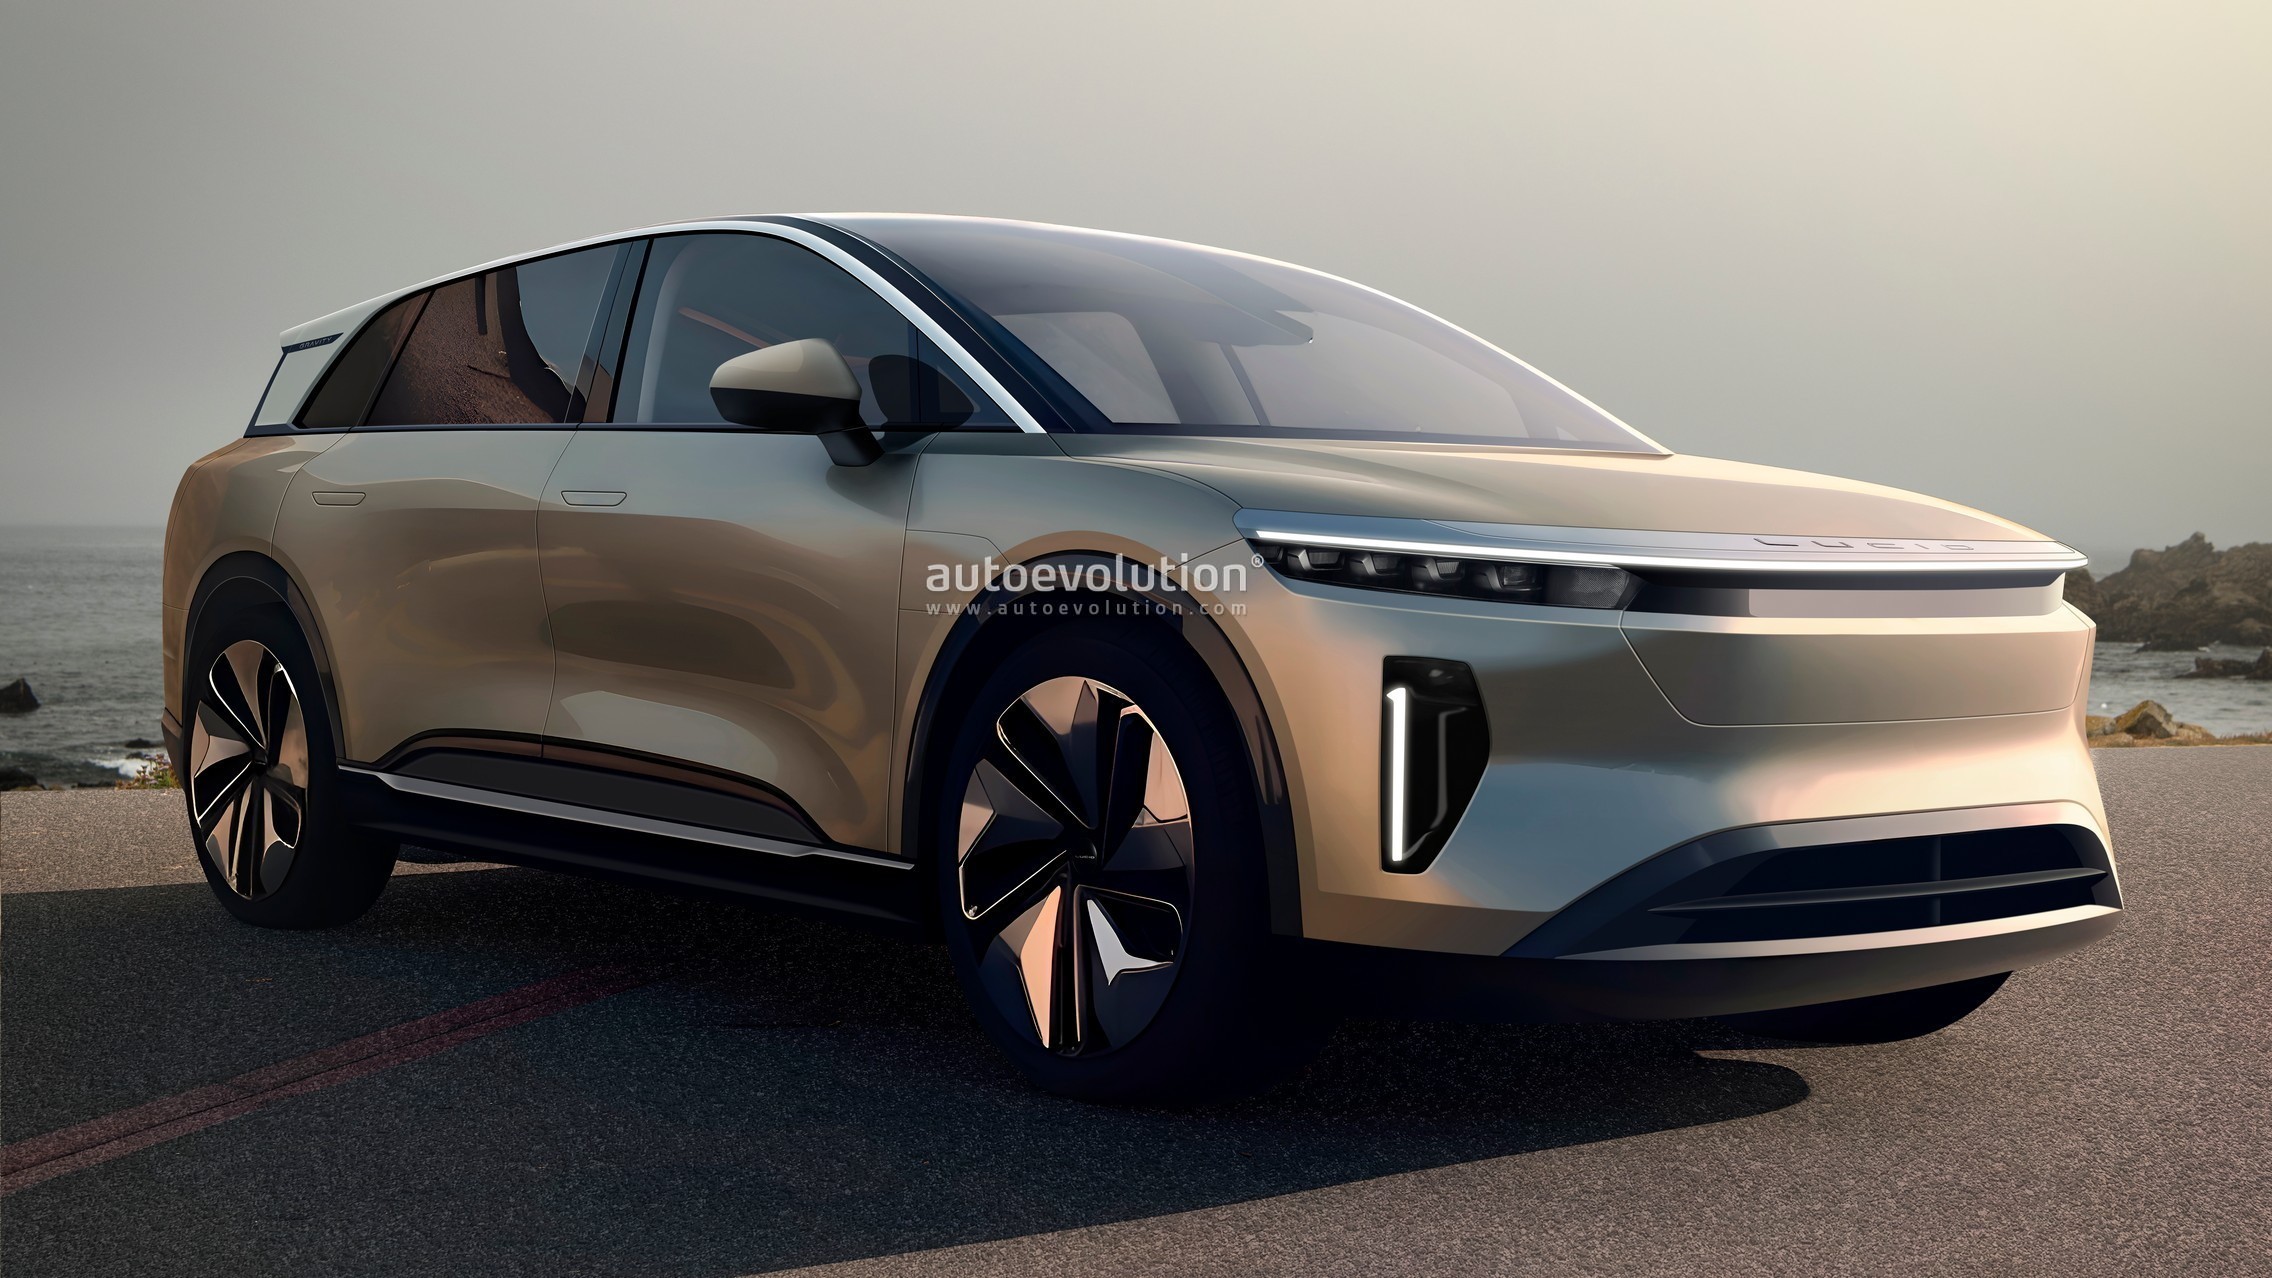 These Are the Best Pictures Yet of the Lucid Gravity SUV